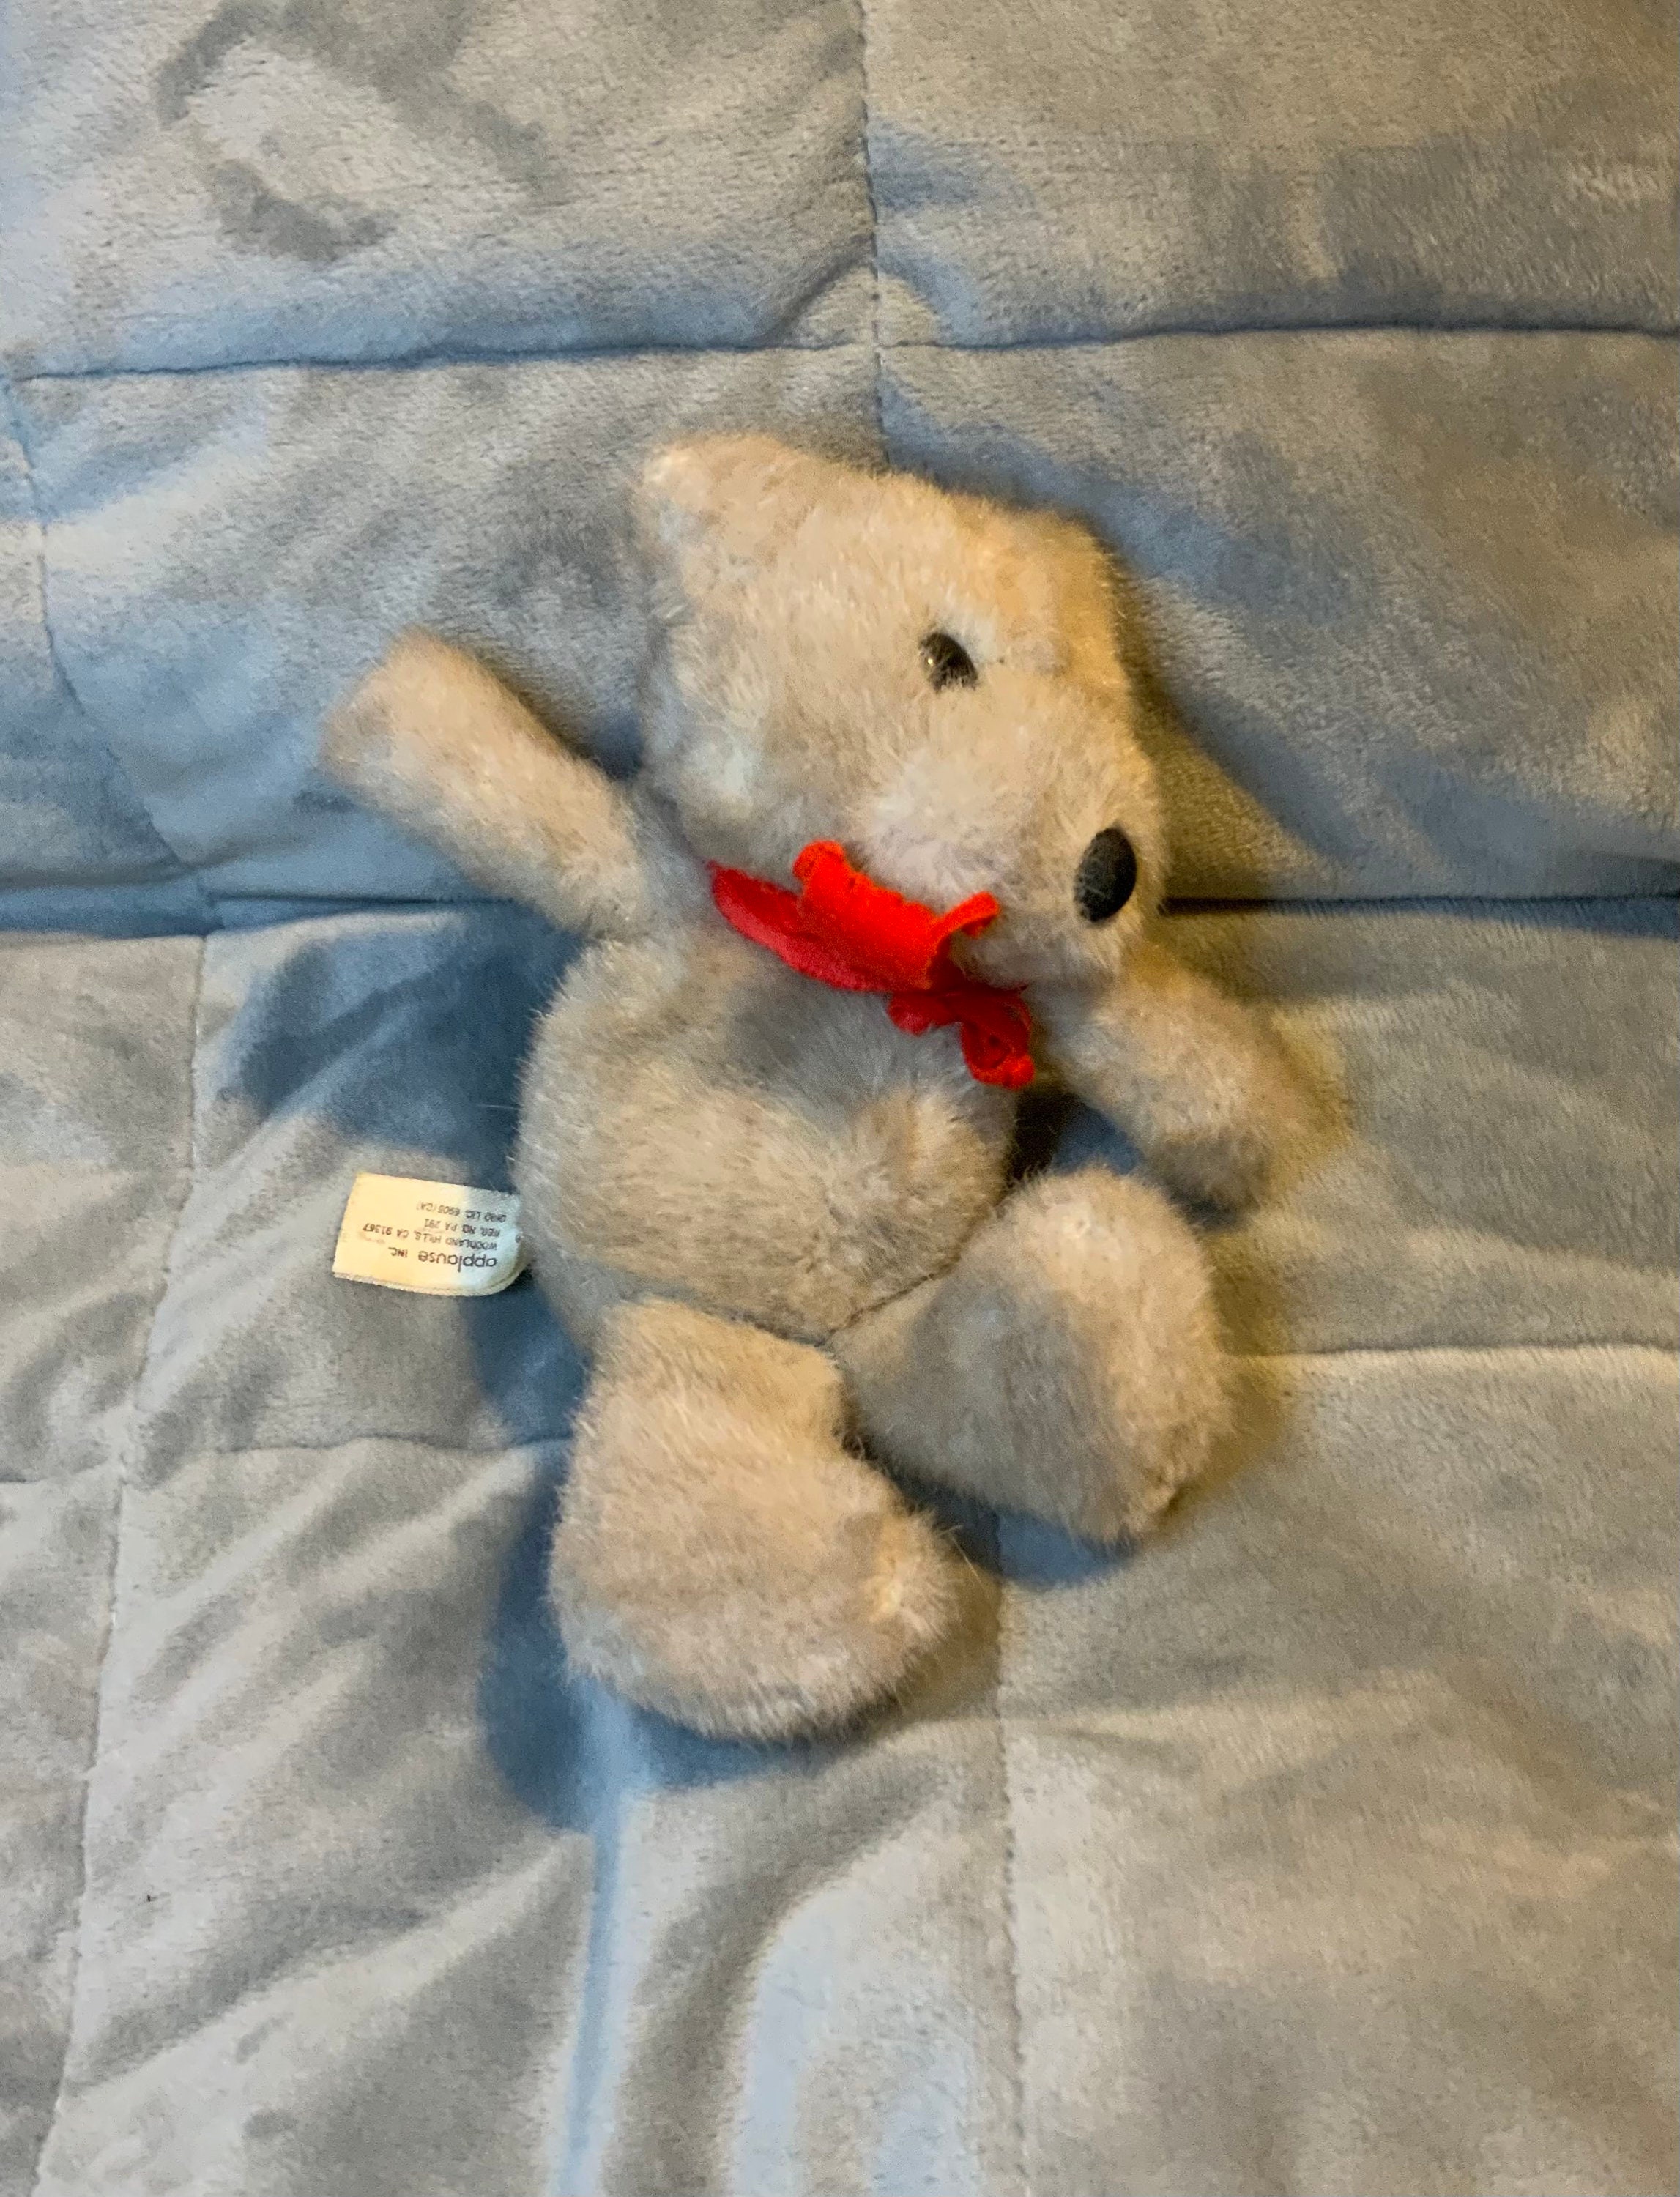 Valentine Vintage Applause 1985 Sweetheart Teddy Bear White Red